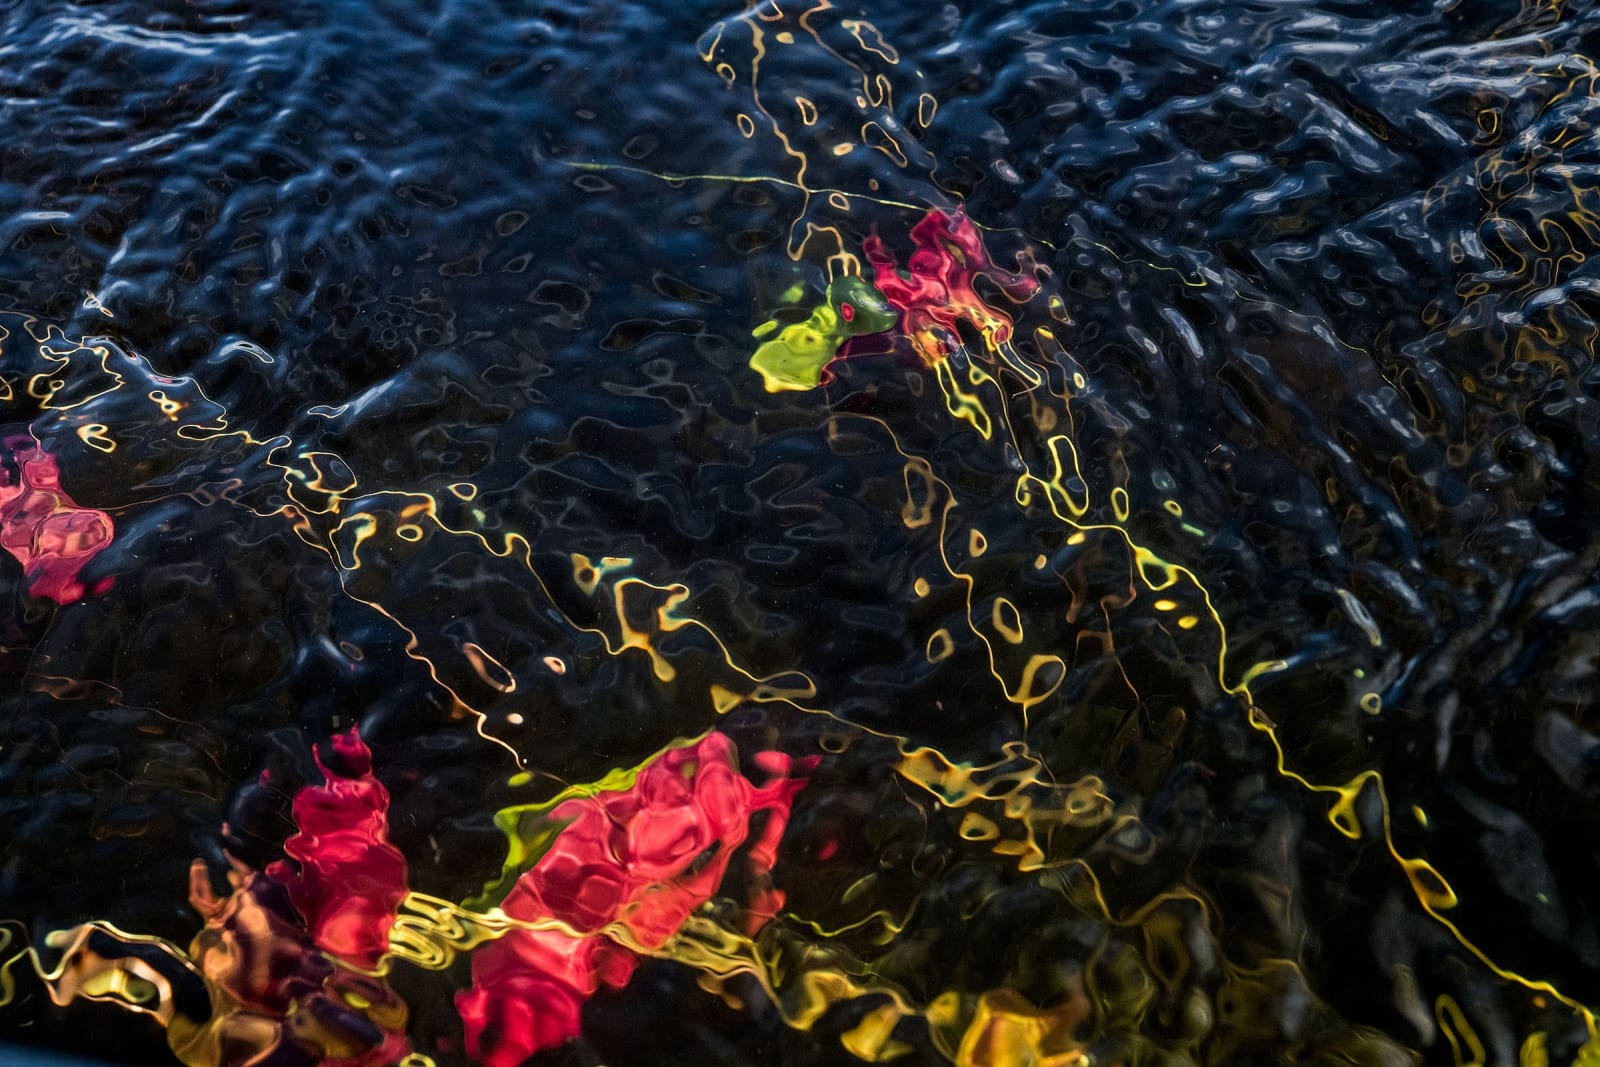 Sage Sohier, Nymphaea 08 (from the series Immersed & Submerged), 2018